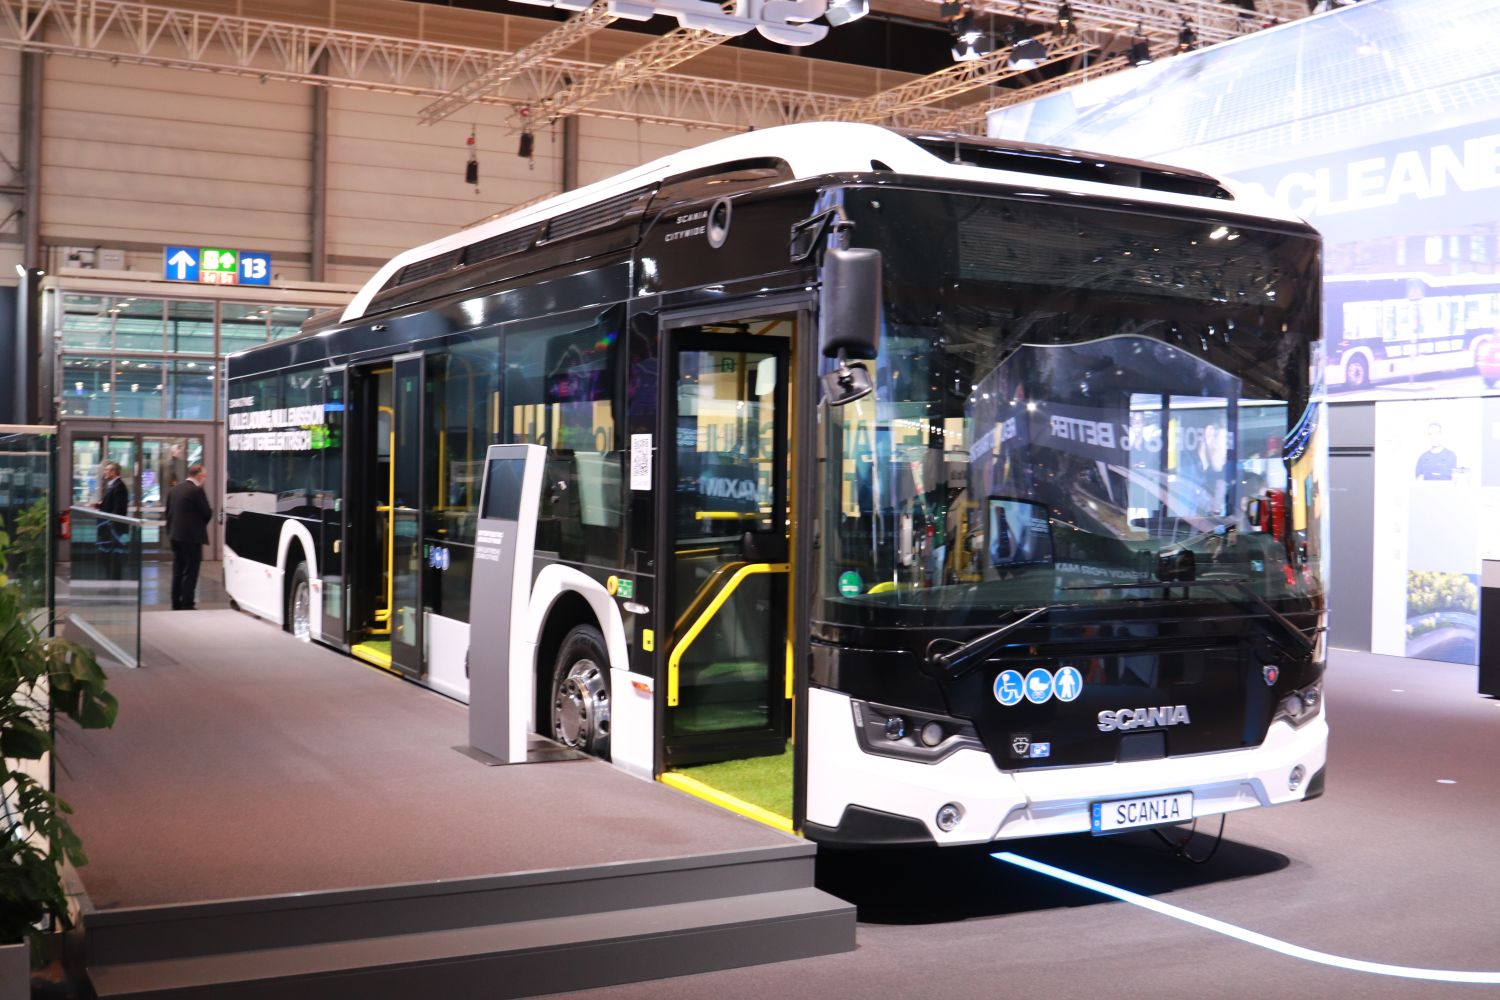 The Scania Citywide was one of the few buses to appear on the stand of a major truck and bus producer